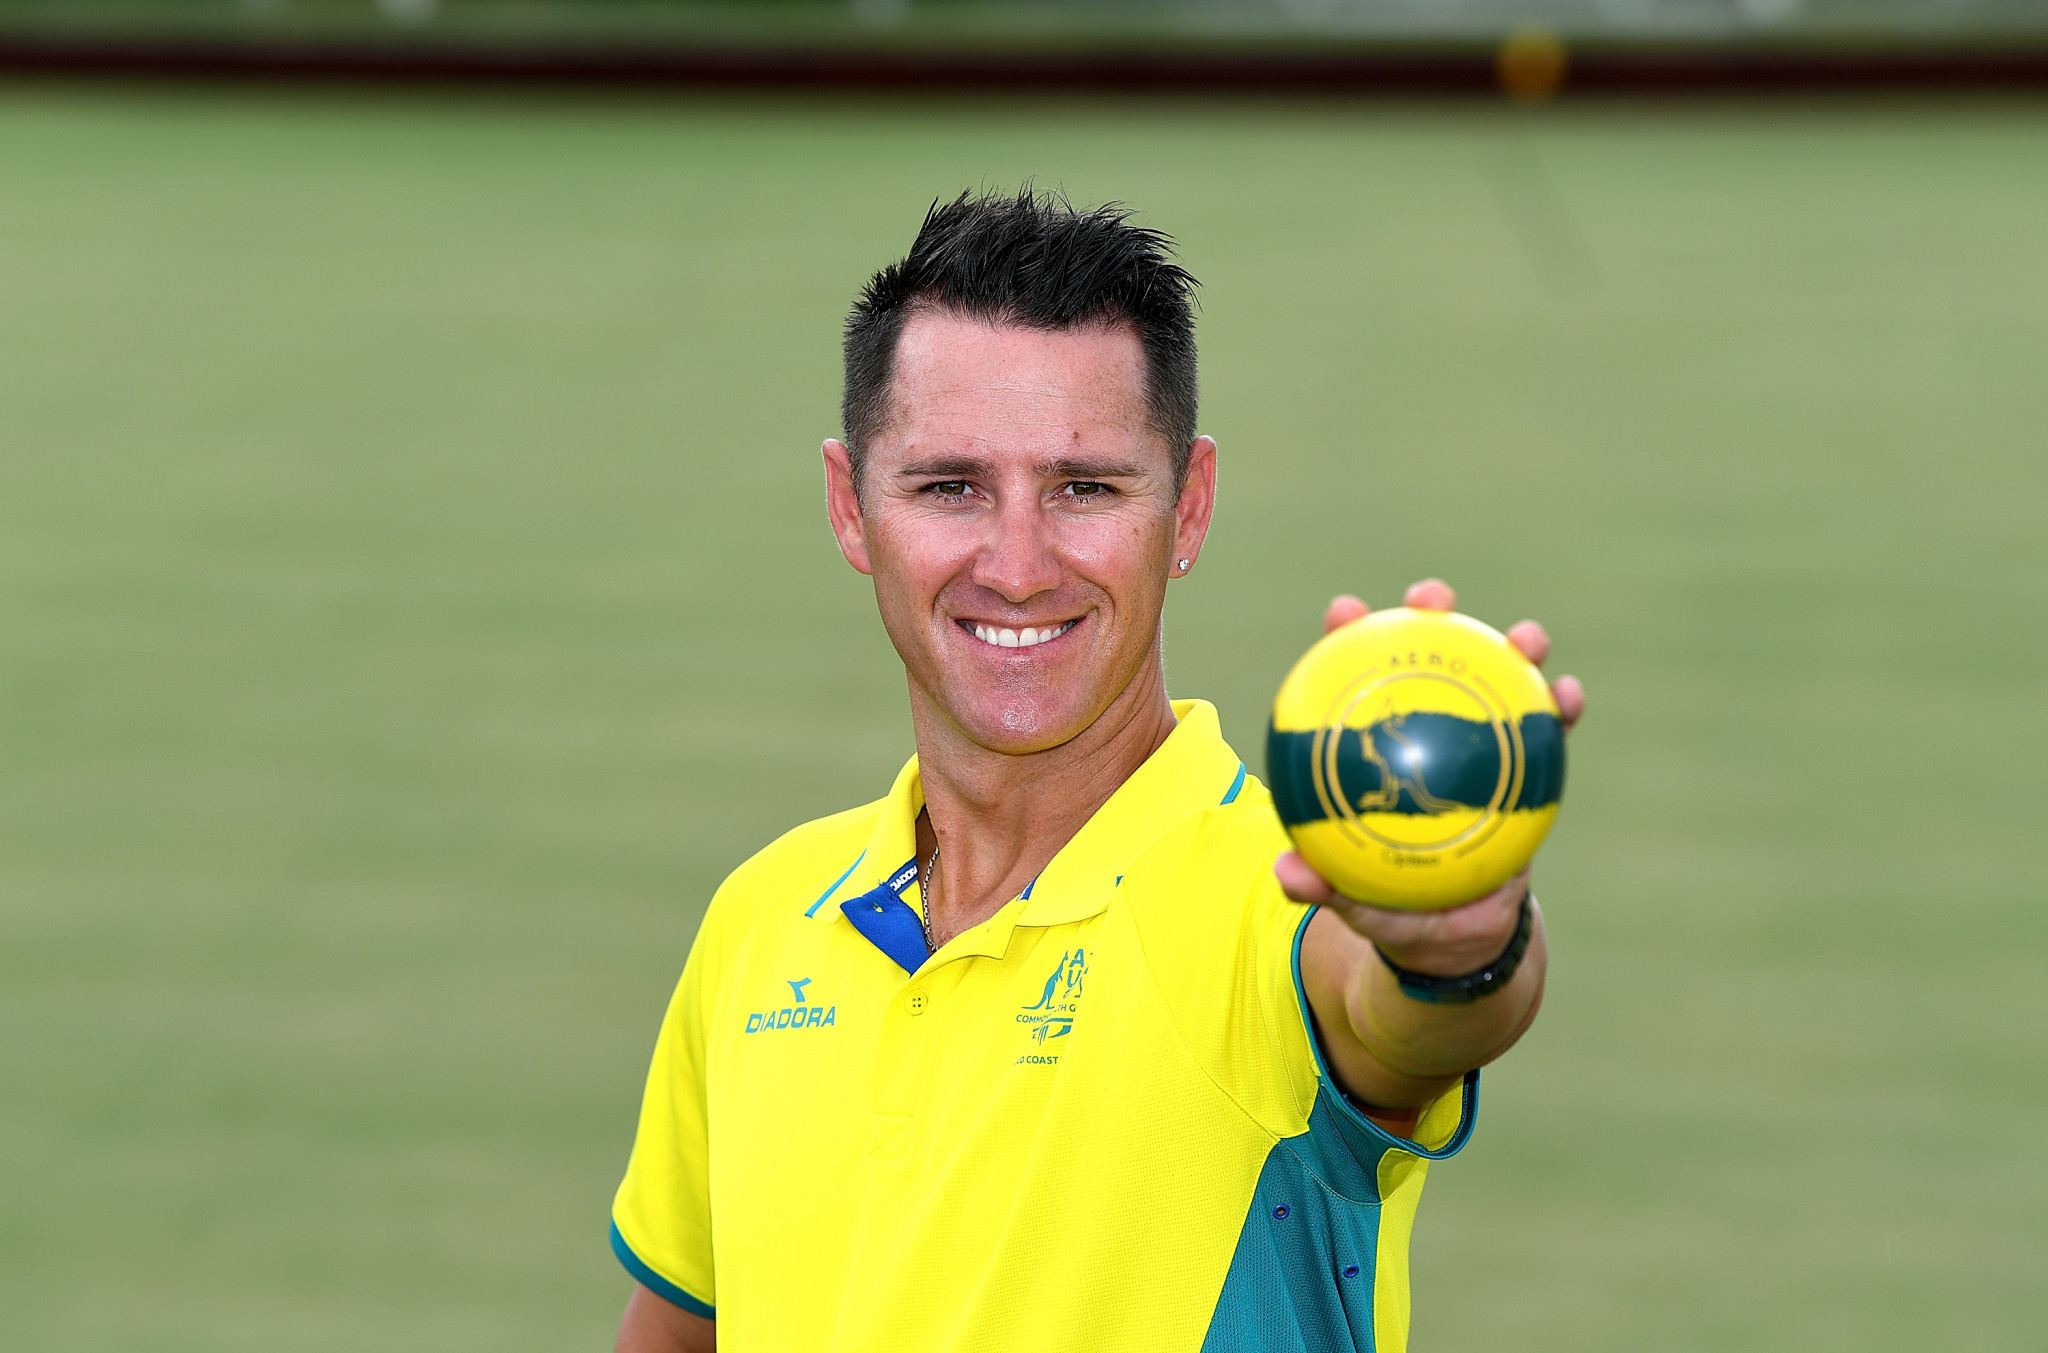 Australian lawn bowls player predicts battle with unfamiliar conditions at Birmingham 2022